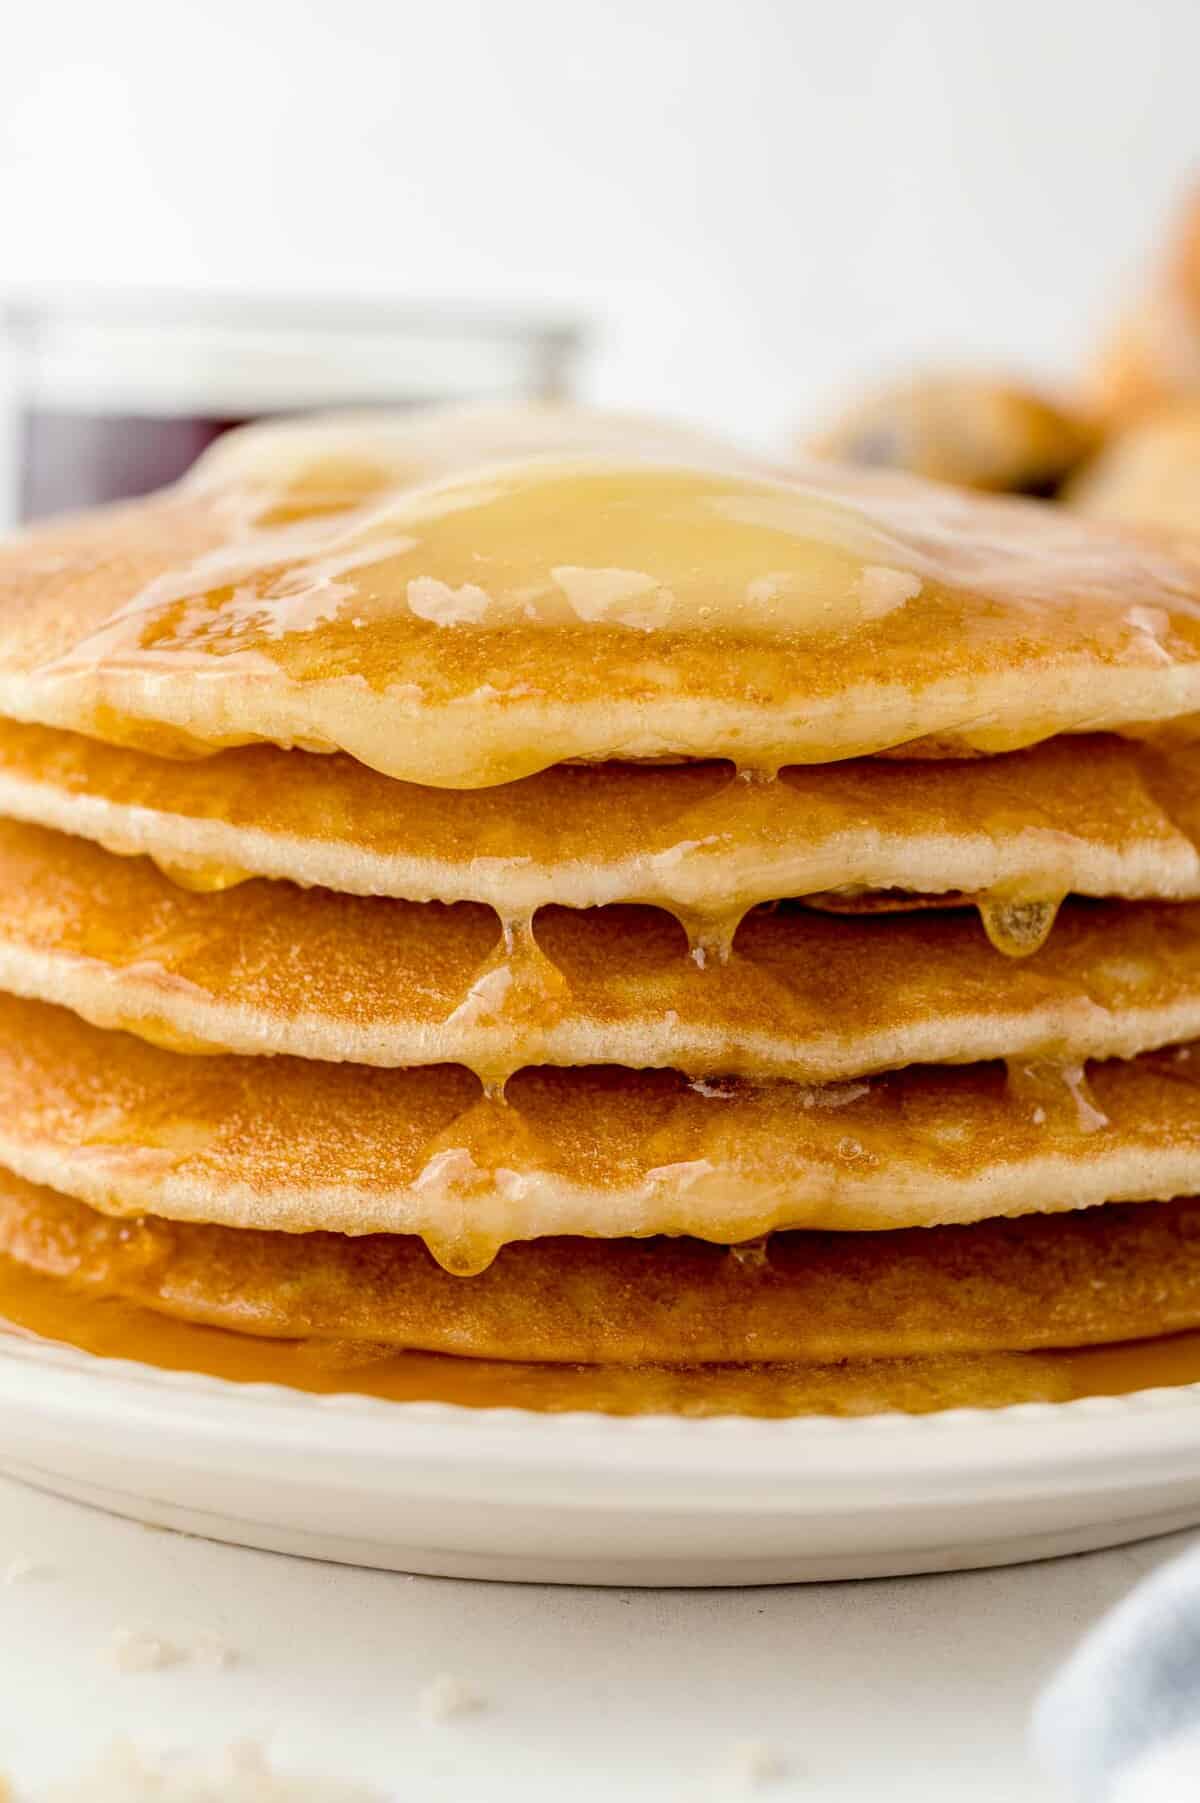 Maple butter dripping down a stack of pancakes.